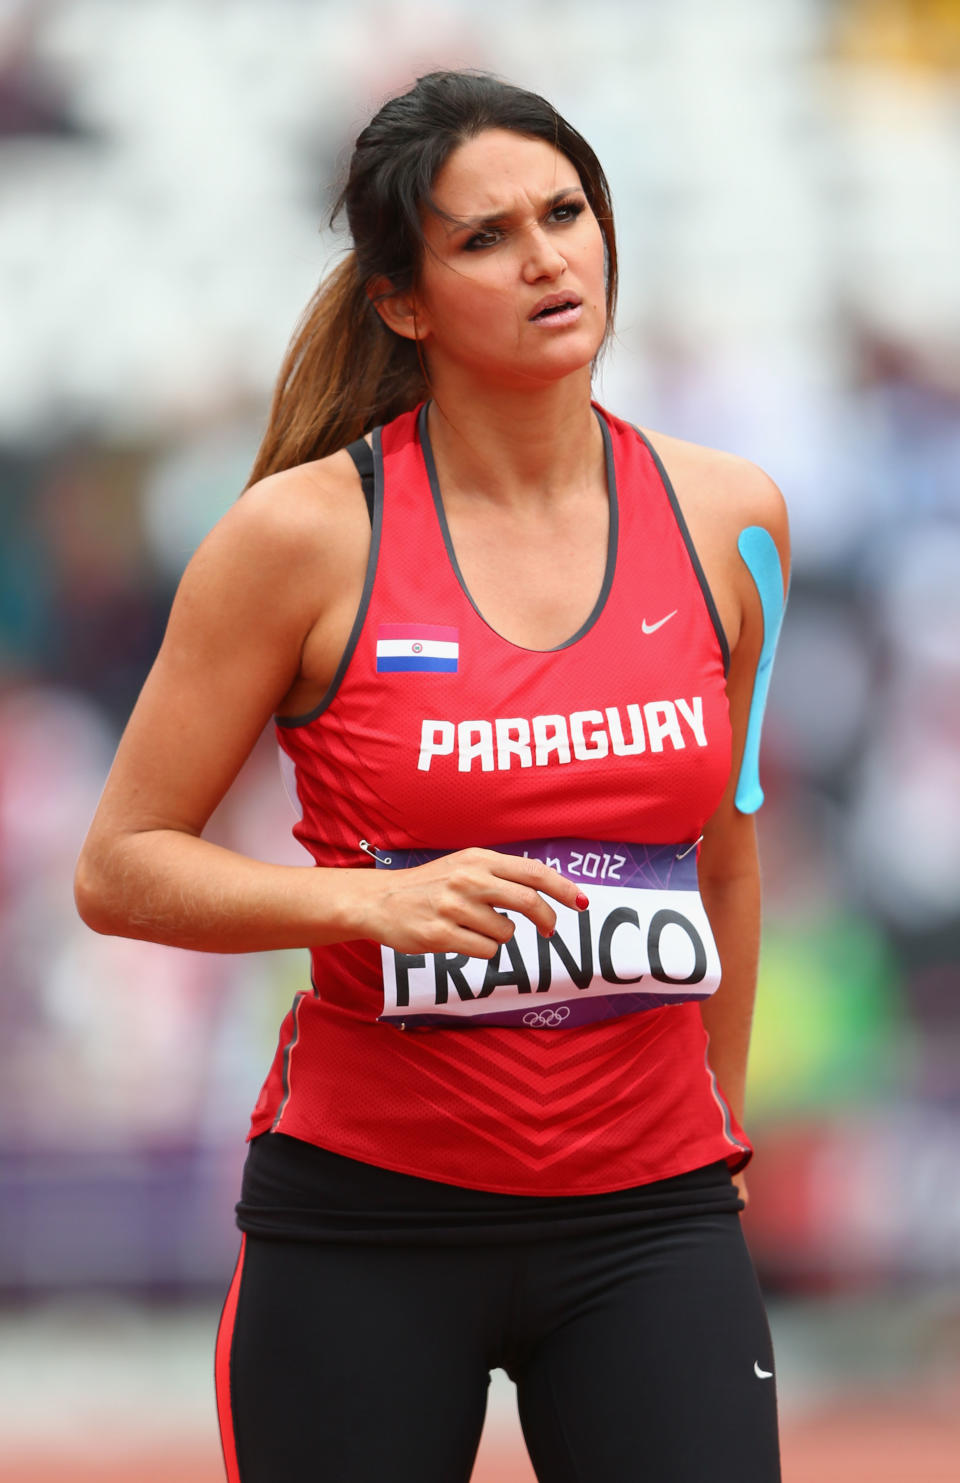 Leryn Franco of Paraguay competes in the Women's Javelin Throw Qualification on Day 11 of the London 2012 Olympic Games at Olympic Stadium on August 7, 2012 in London, England. (Photo by Michael Steele/Getty Images)